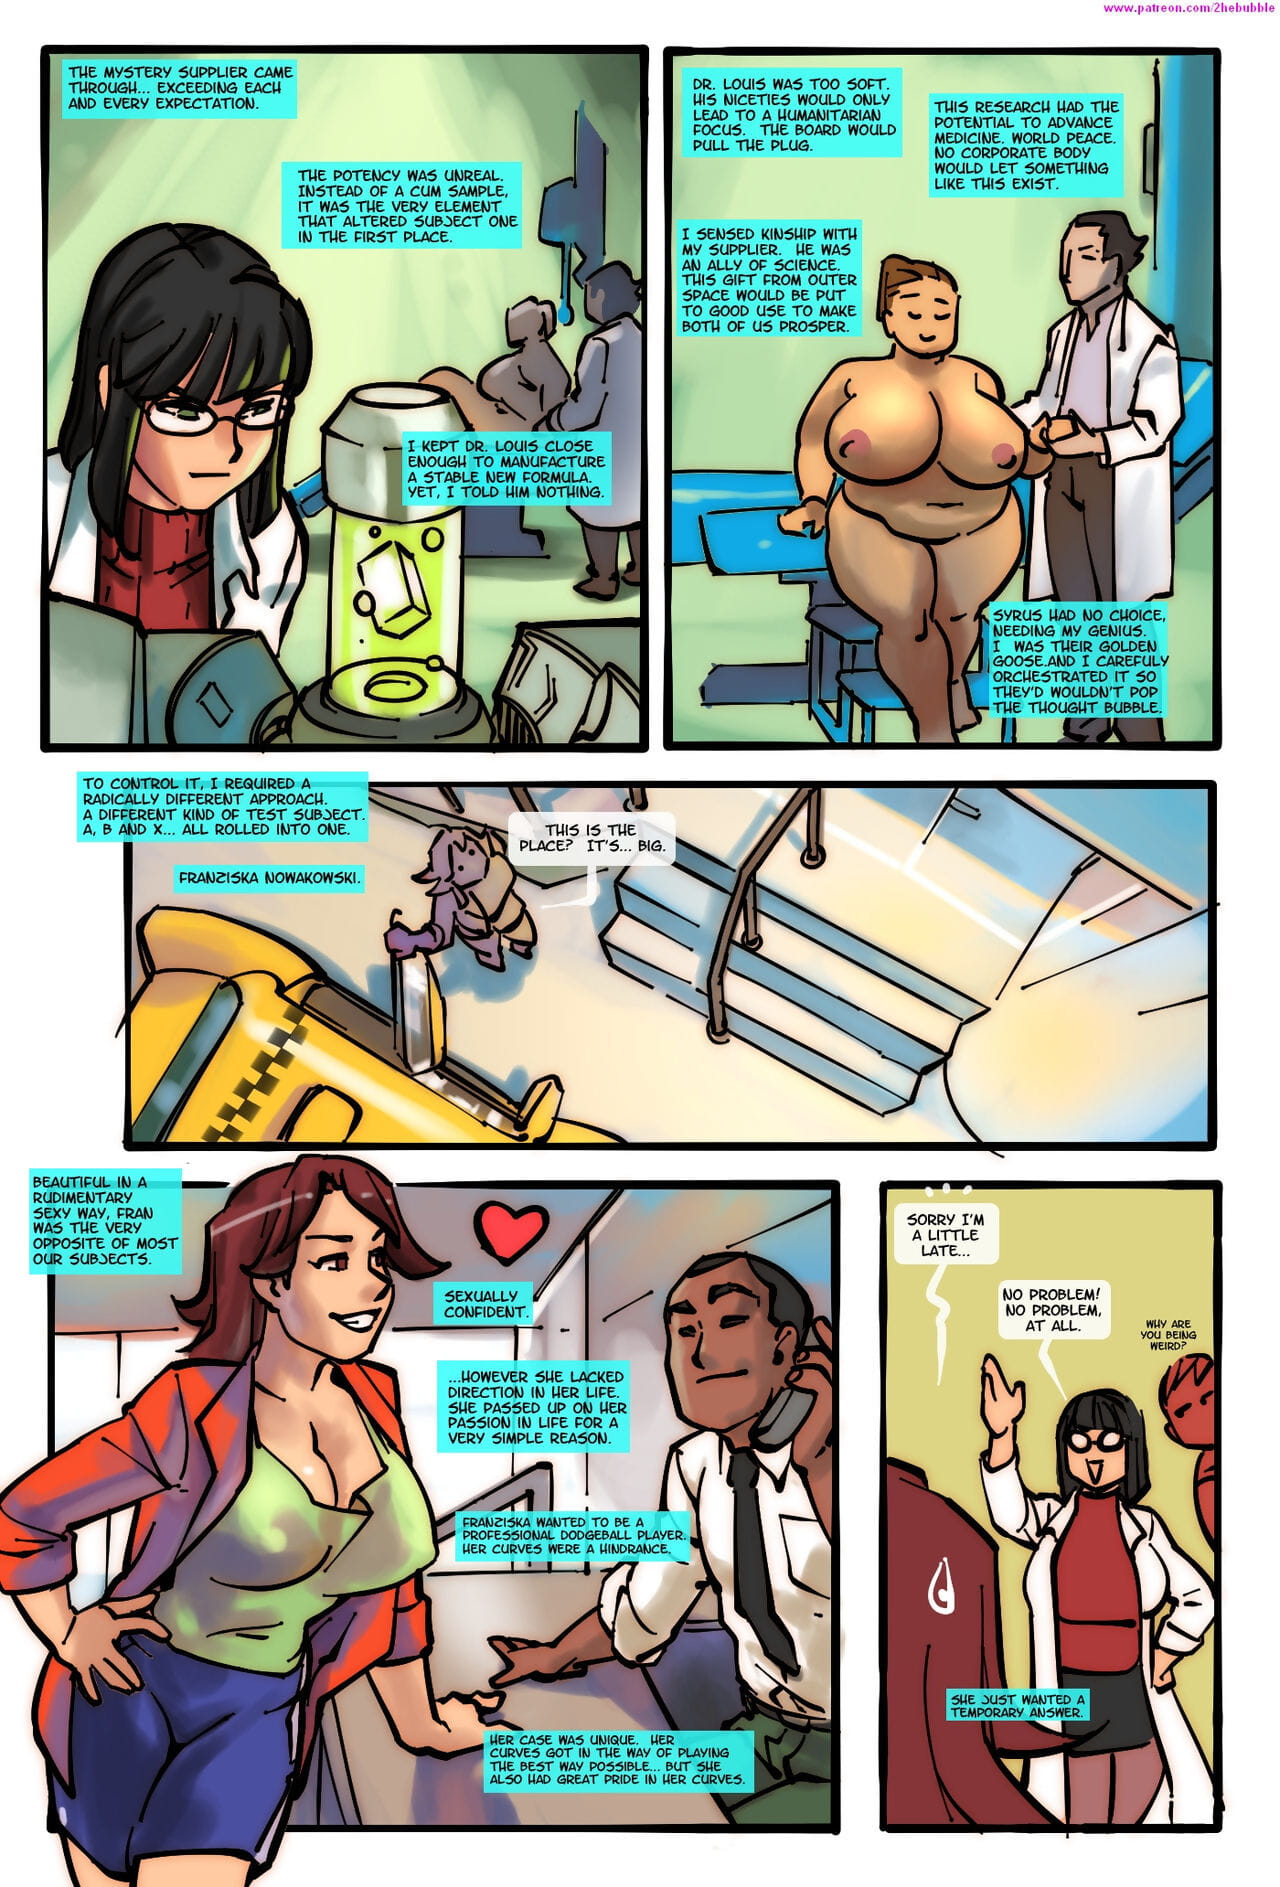 Sidneymt- Thought Bubble #2 page 1